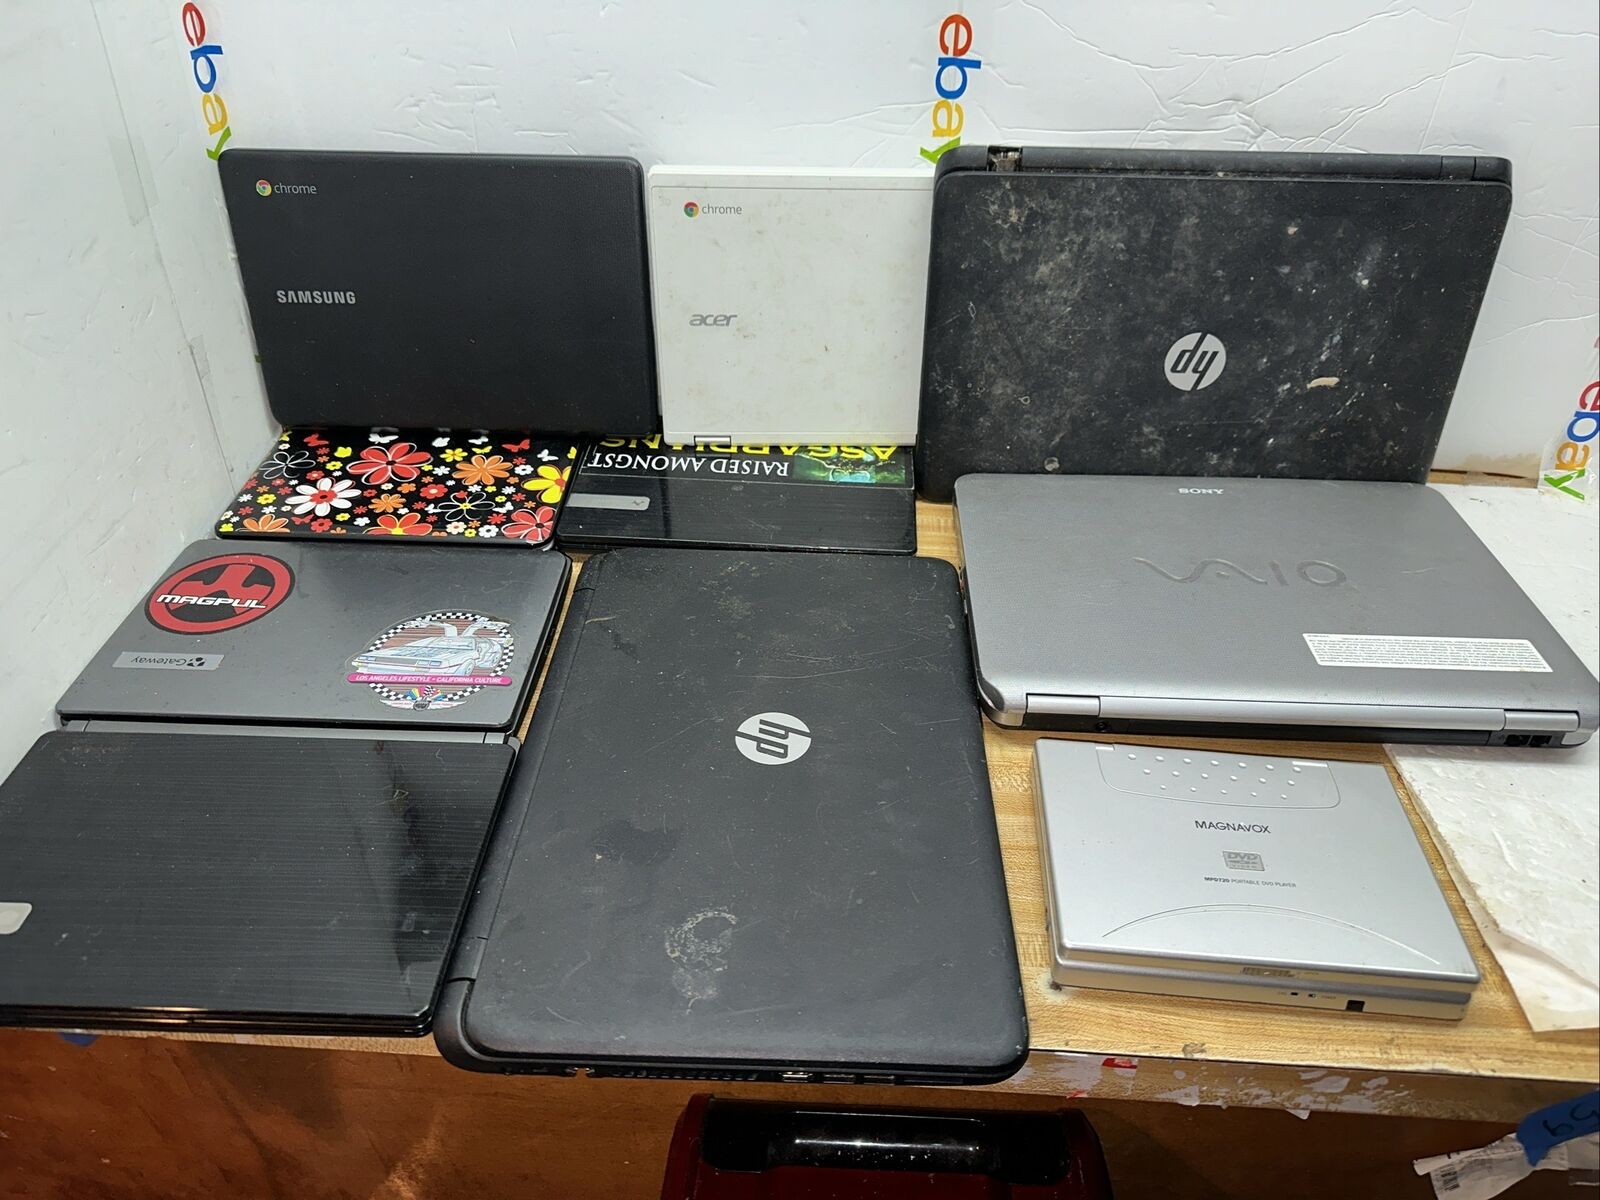 Large Lot Of 9 Laptops & Cromebooks Untested As Is Parts Or Repair + DVD Player